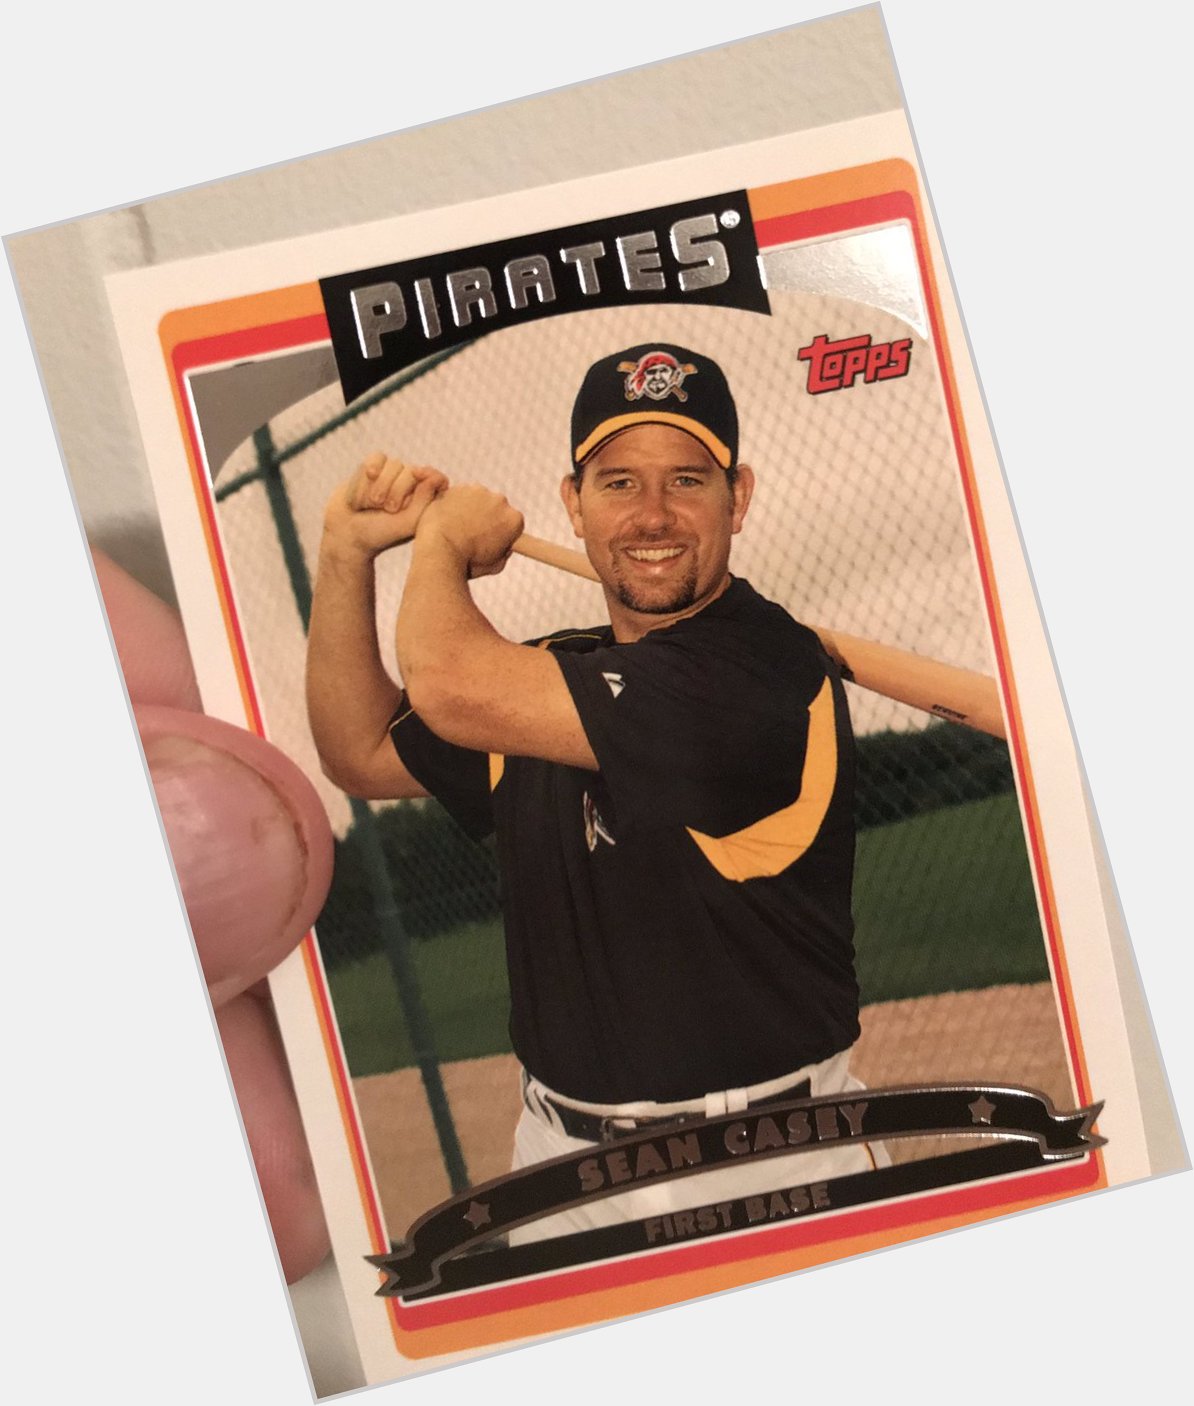 Happy birthday to Sean Casey, who NOBODY remembers as a Pirate 